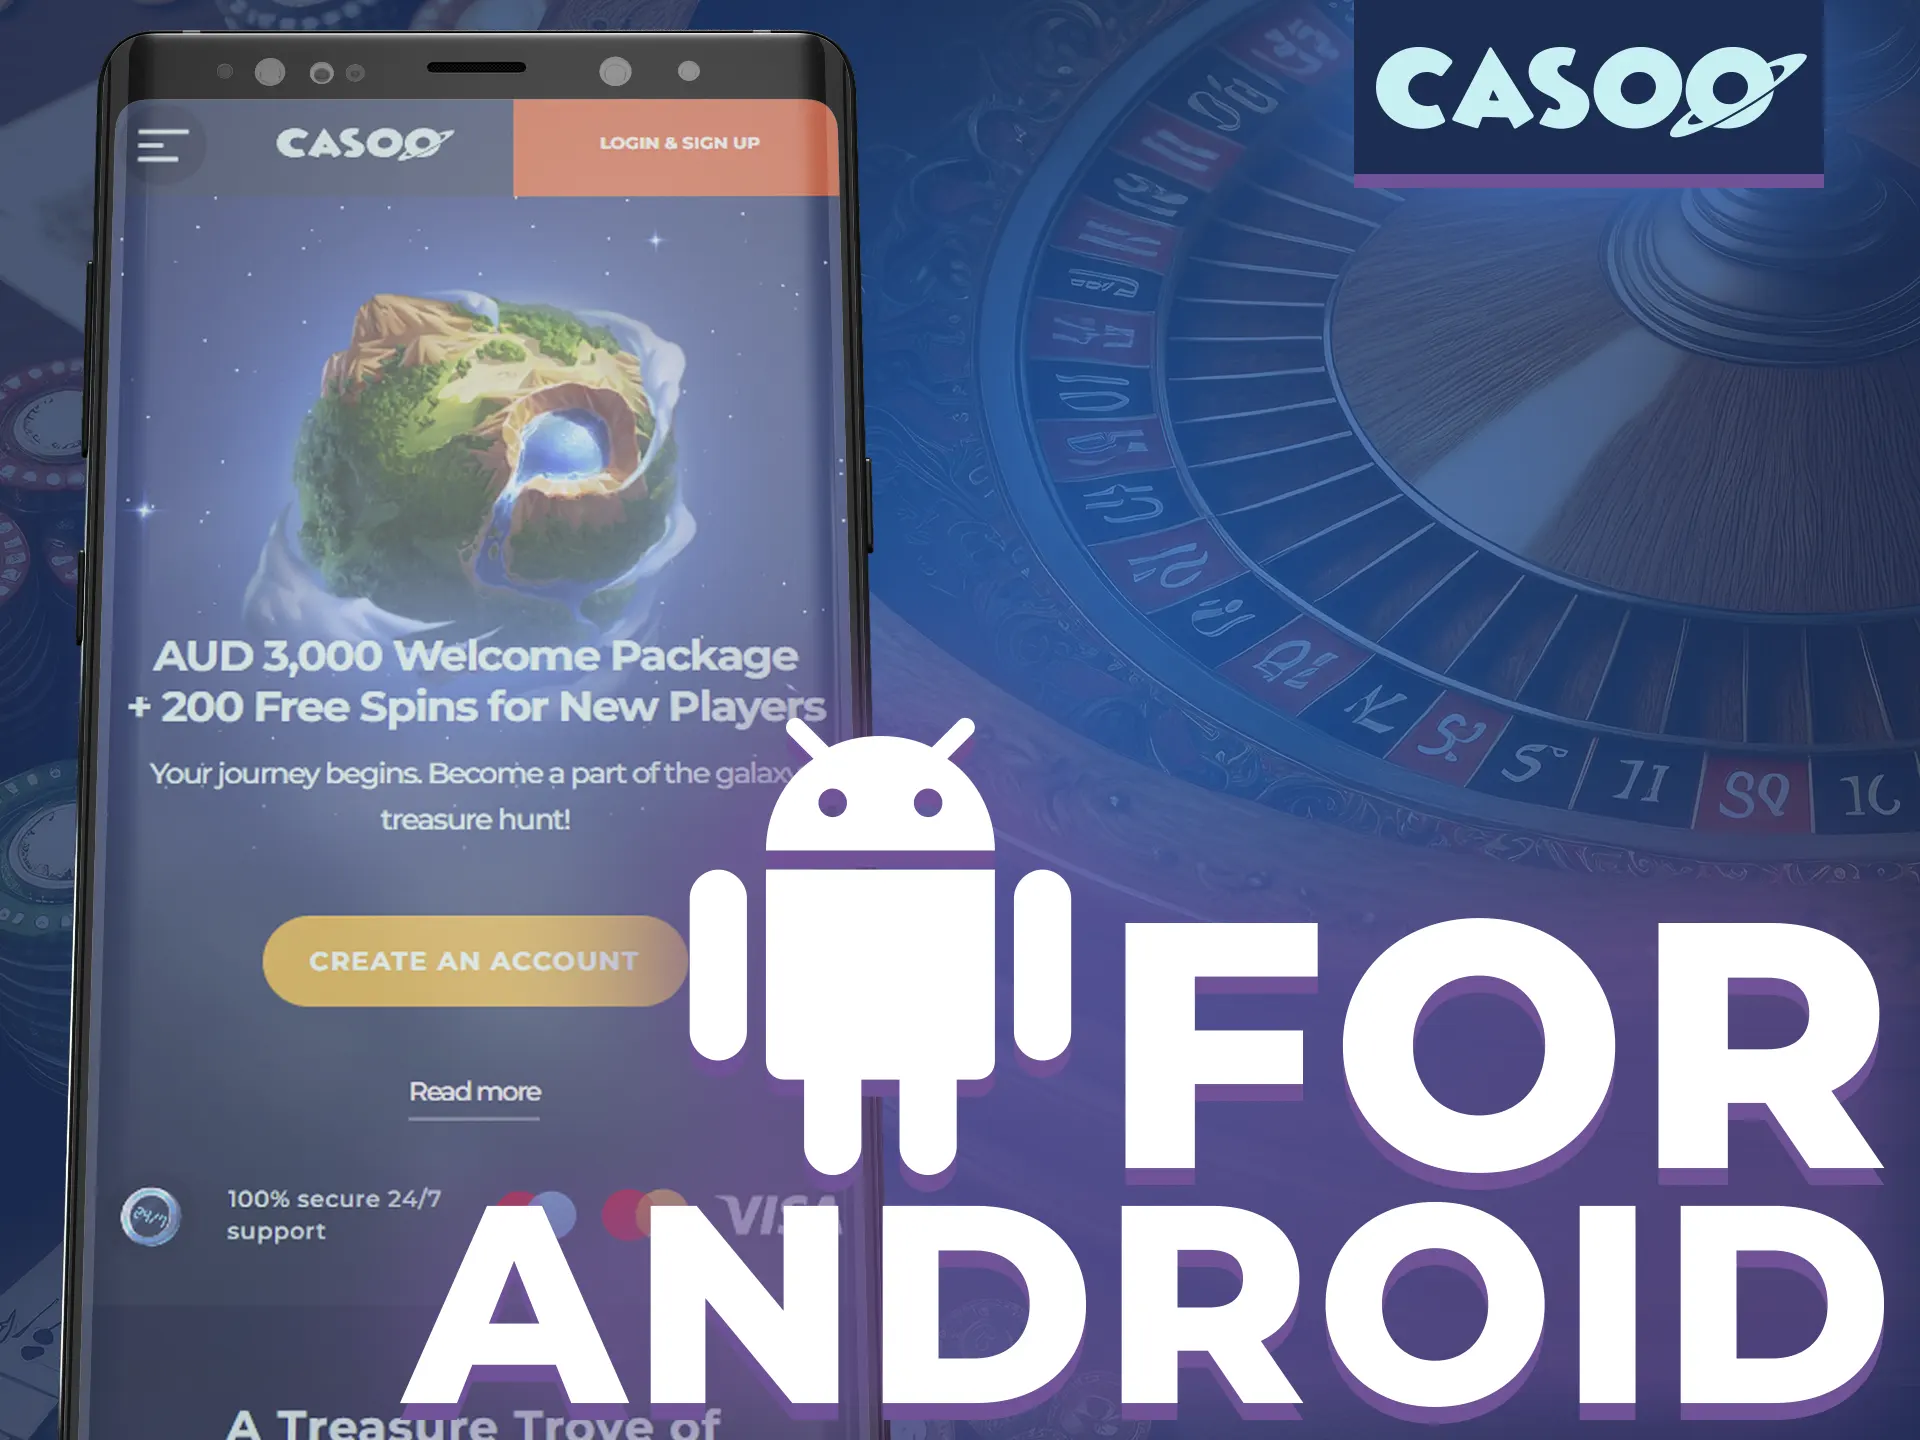 Mobile version of Casoo casino available on Android.